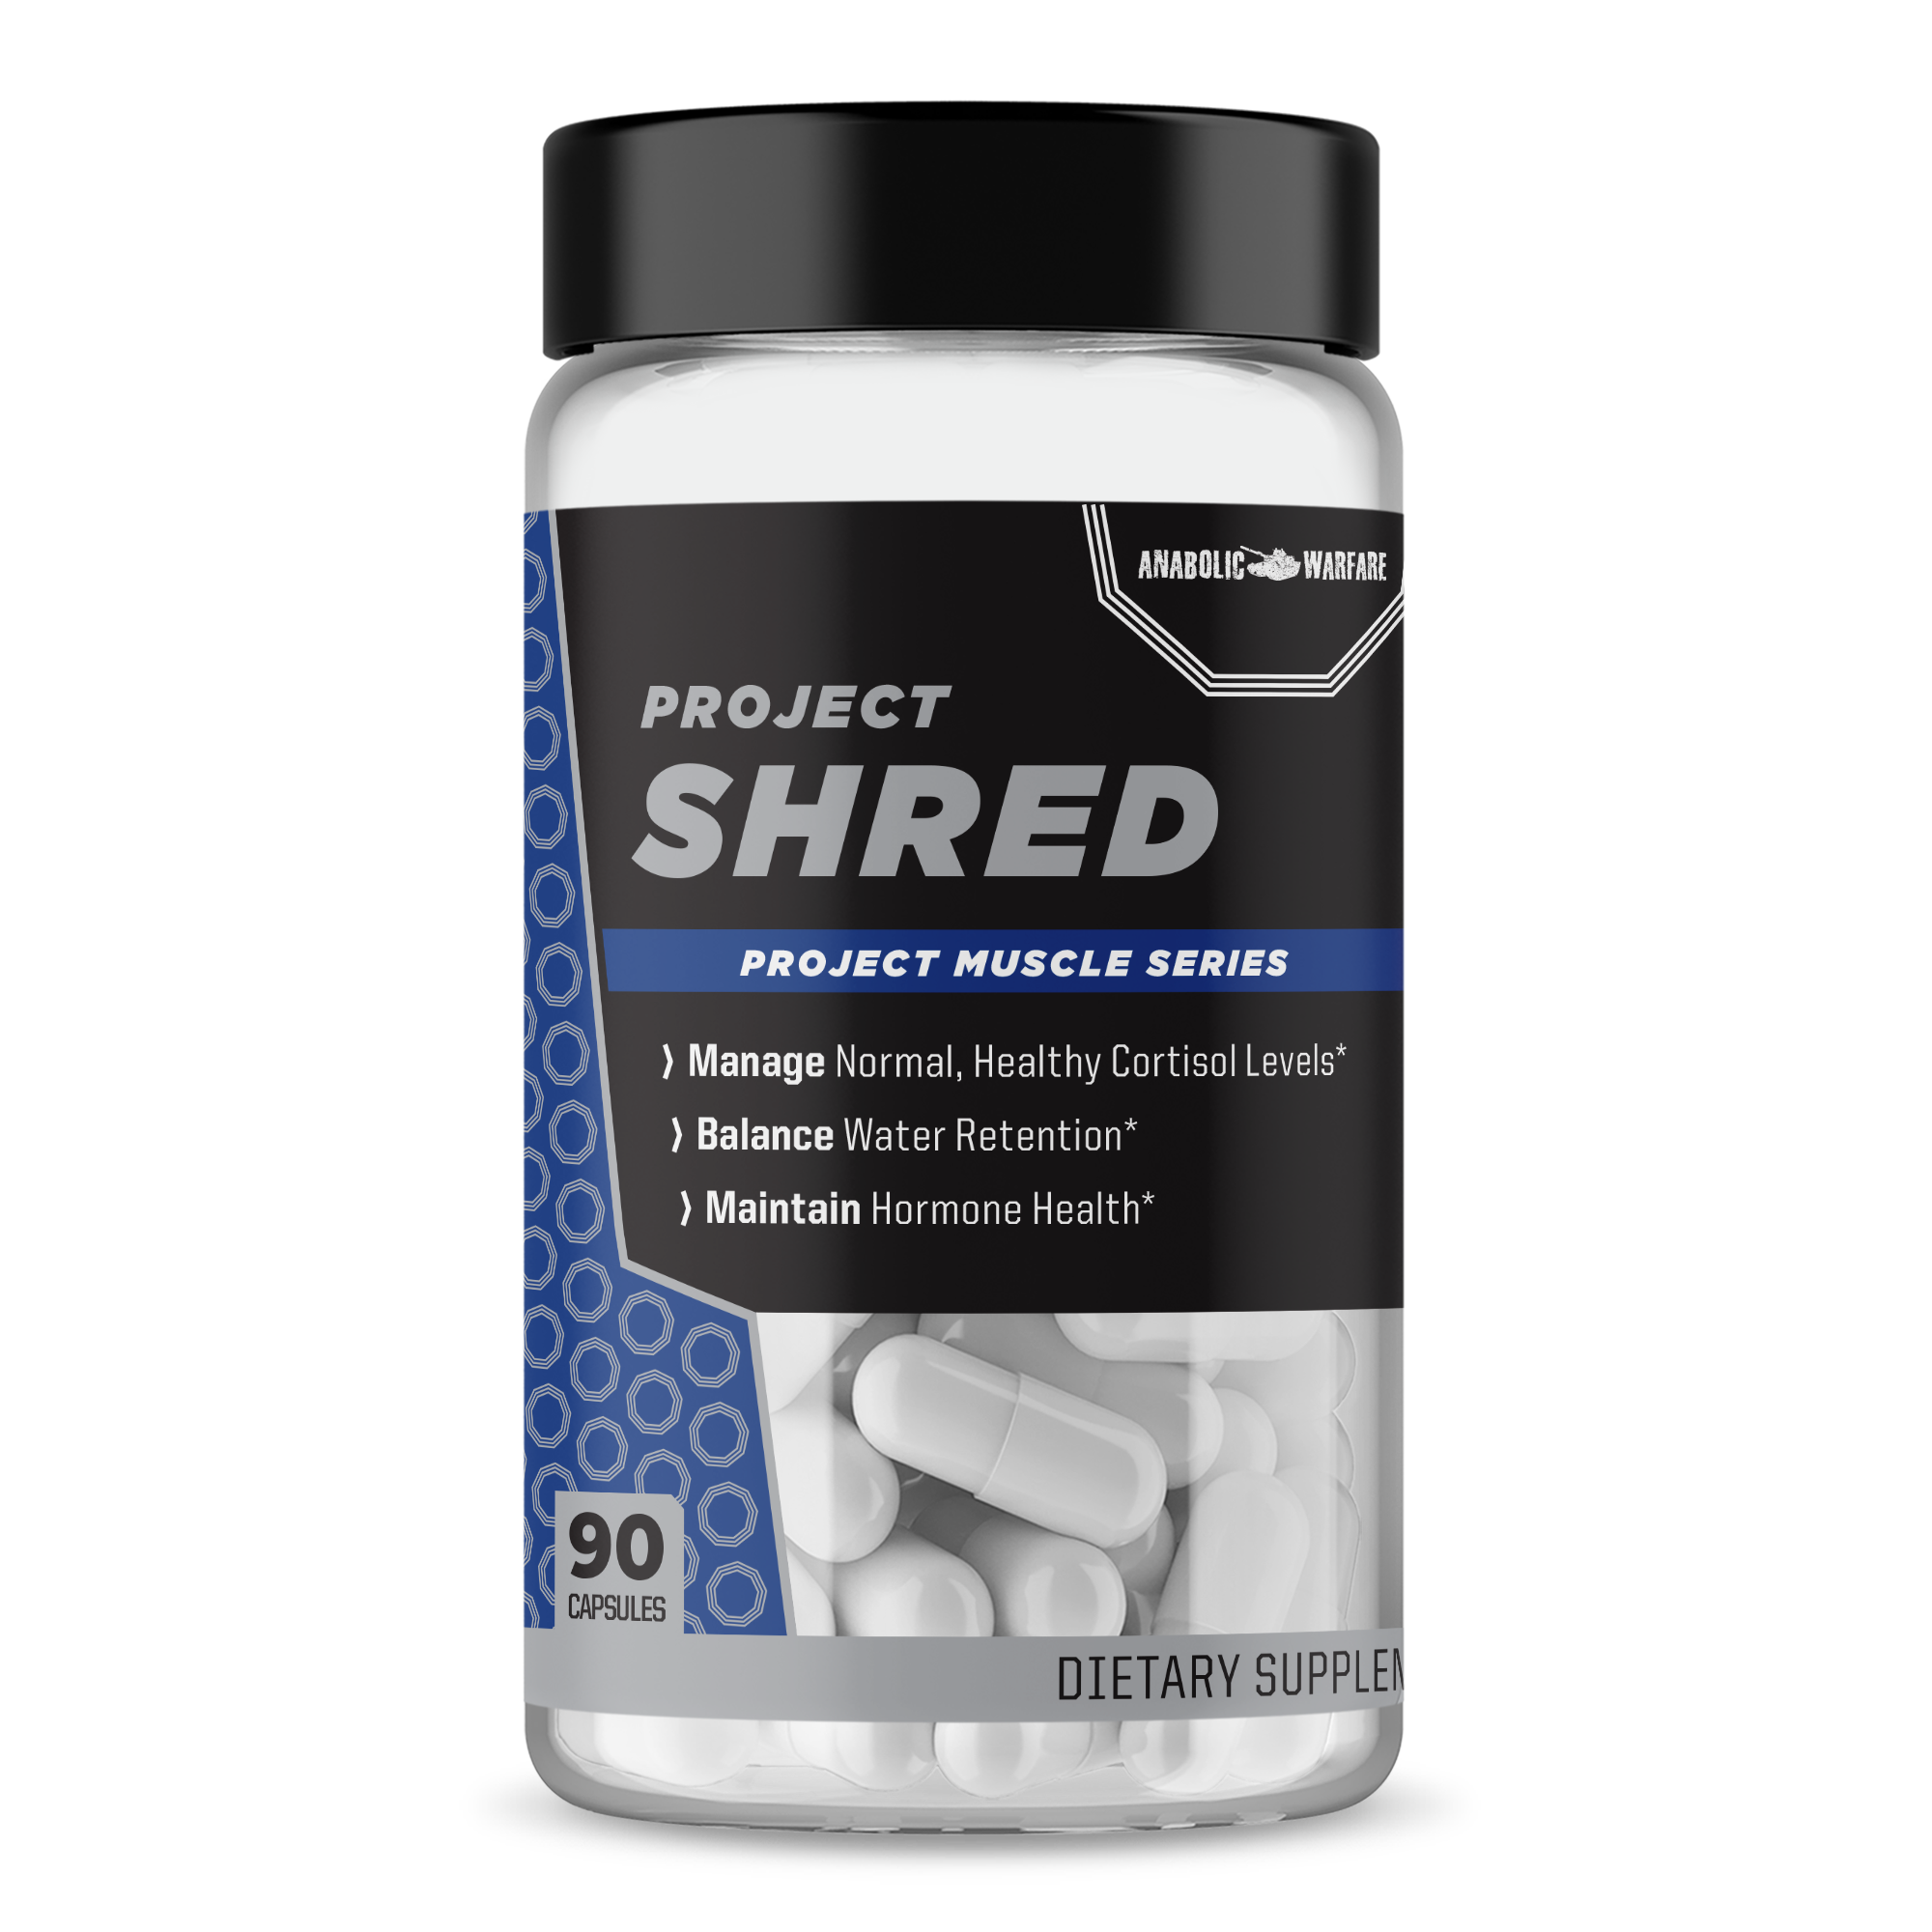 LLTLITT T PROJECT SHRED PROJECT MUSCLE SERIES Manage Normal, Healthy Cortisol Levels* Balance Water Retention* Maintain Hormone Health* DIETARY SUPPLE 